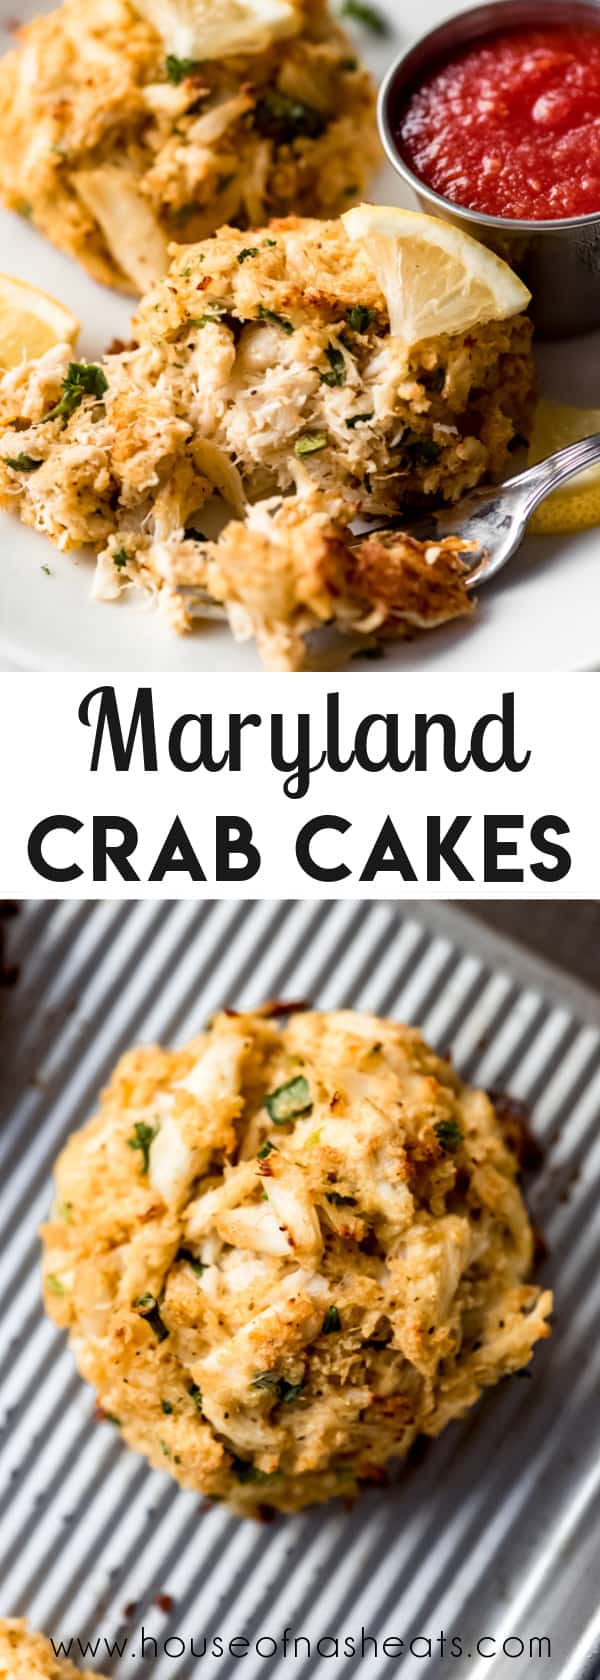 Juicy Maryland Crab Cakes (Baked or Fried) - House of Nash Eats